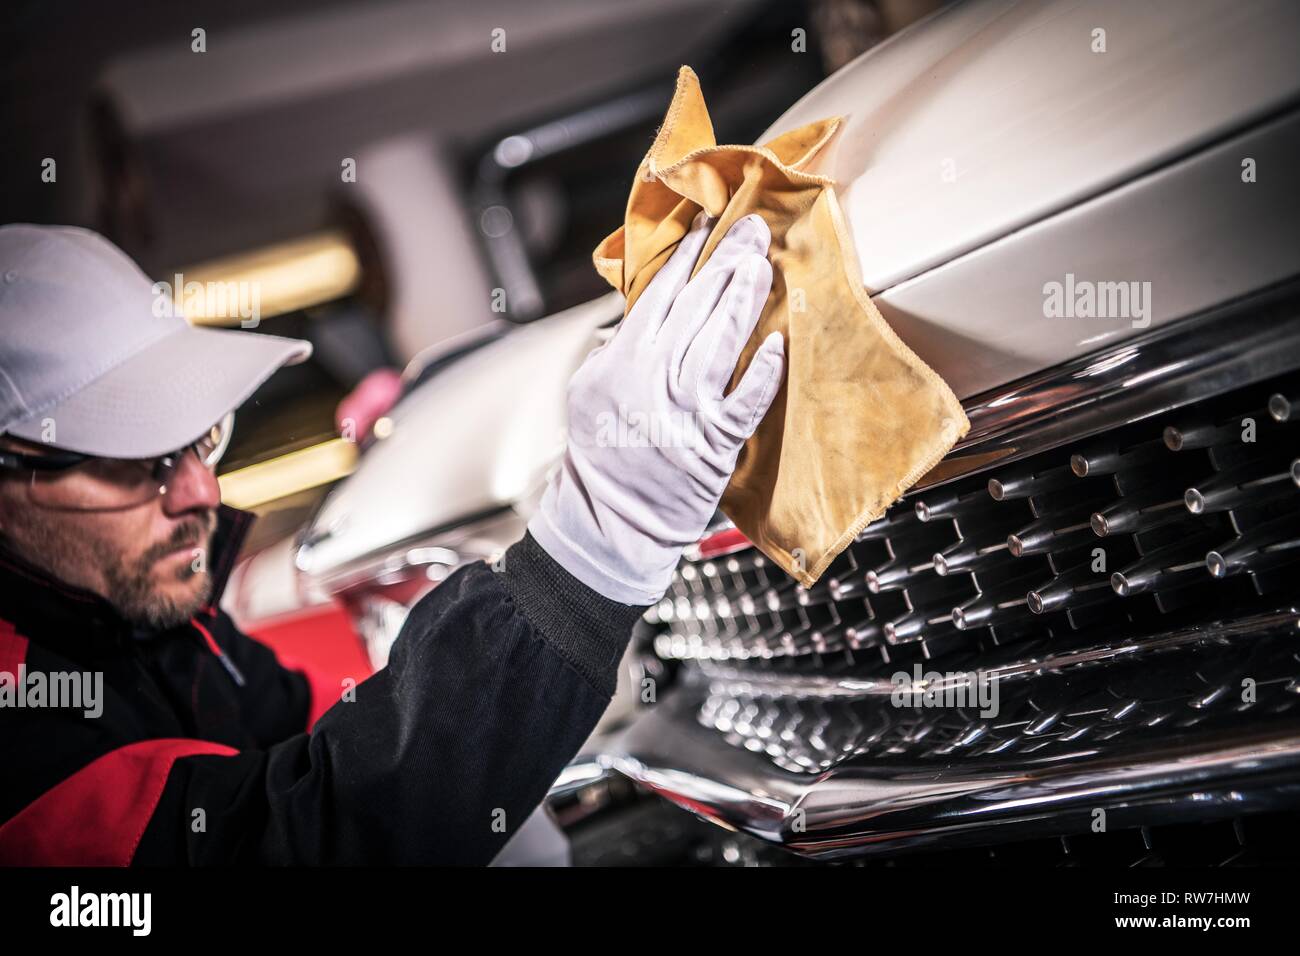 Caucasian Men Cleaning Chrome Grill of Classic Car. Vehicle Maintenance. Stock Photo